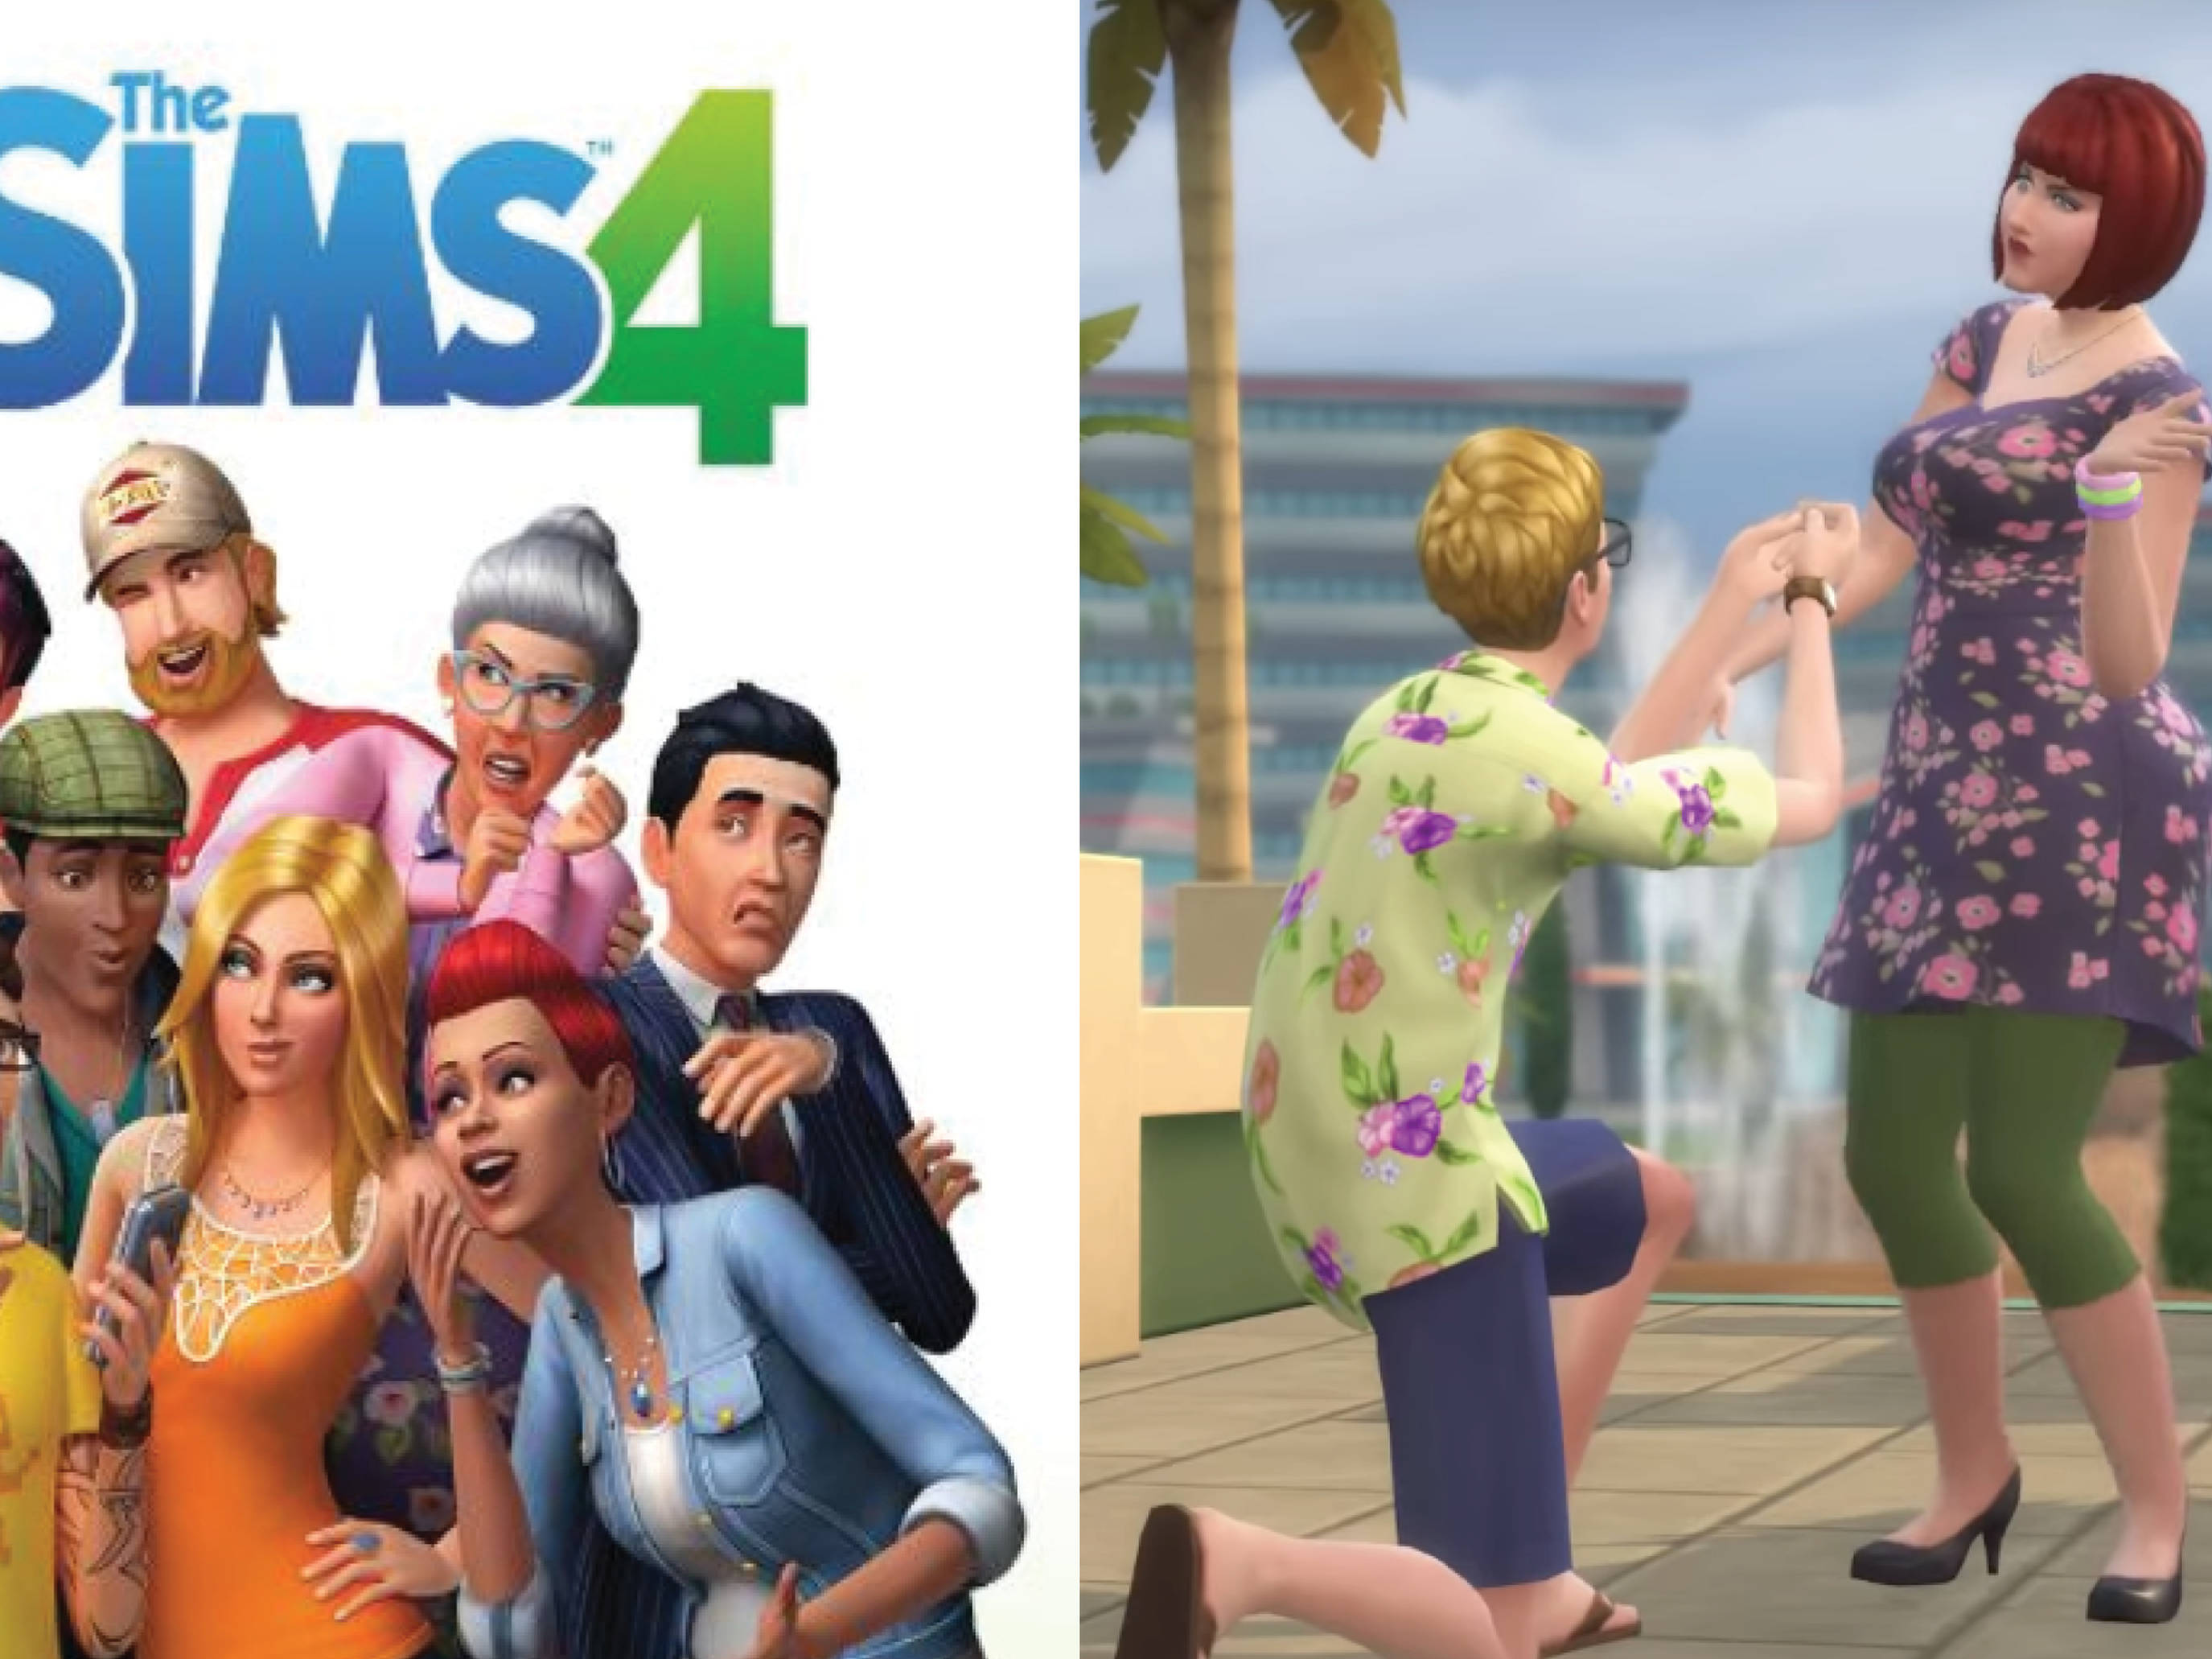 The Sims 4 is free on Origin for a limited time